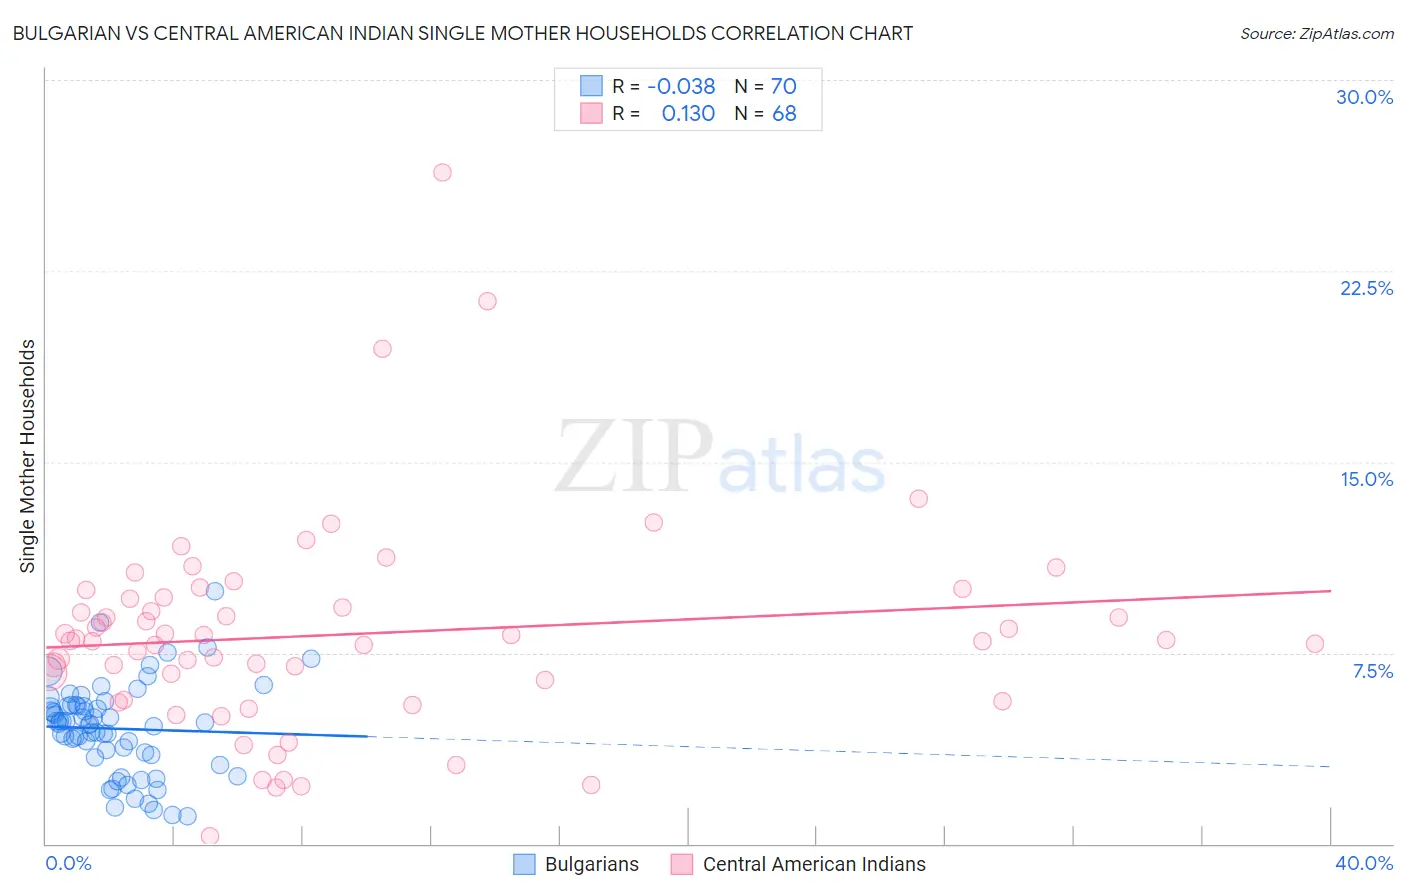 Bulgarian vs Central American Indian Single Mother Households